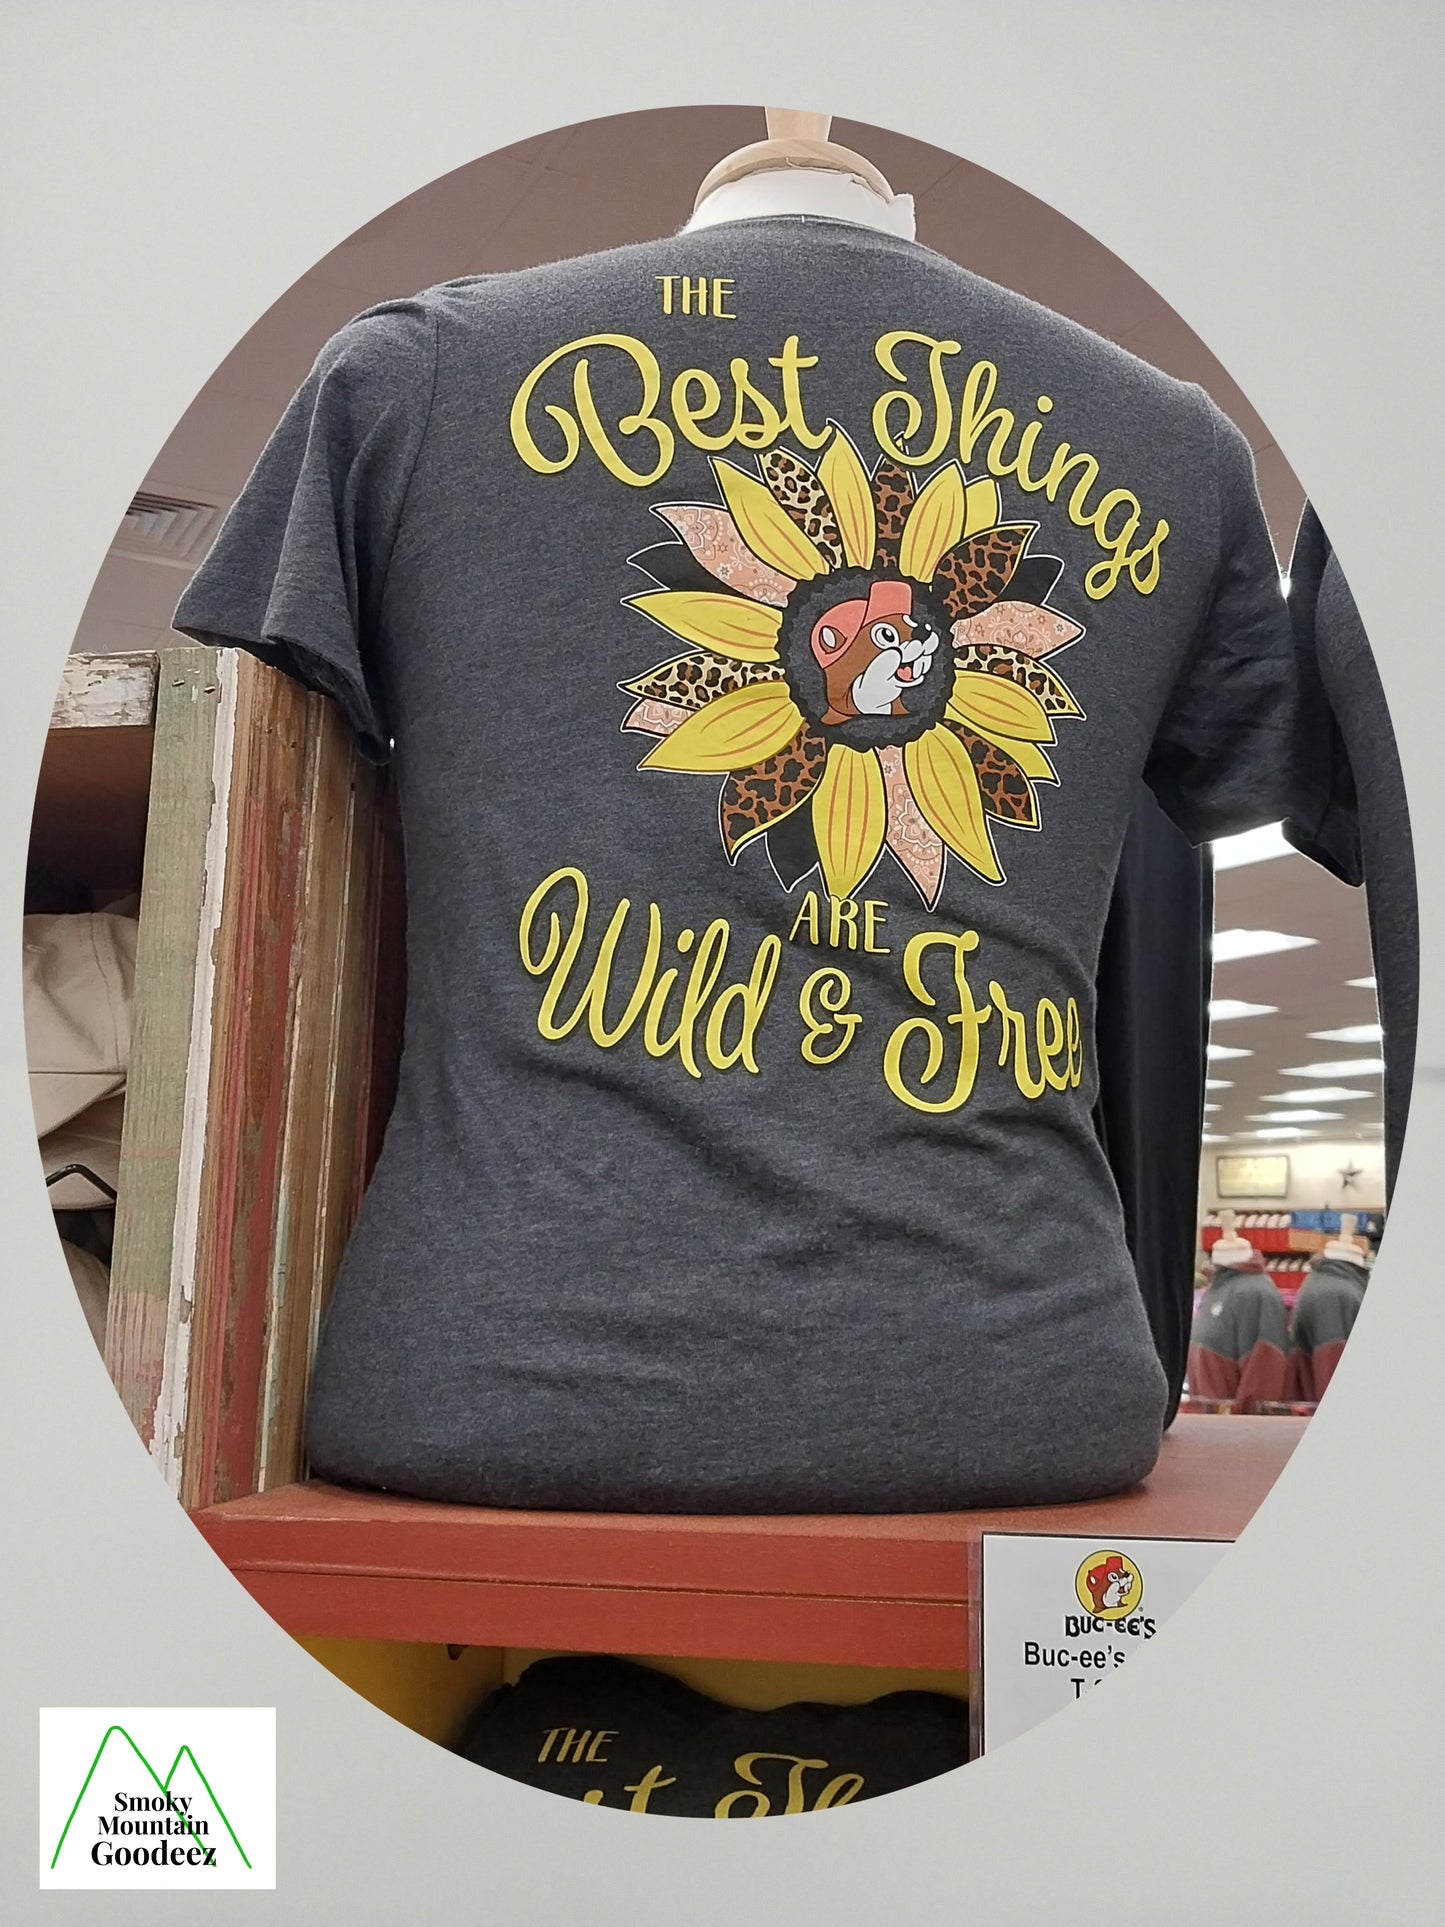 Buc-ee's "The Best Things are Wild & Free" T-shirt